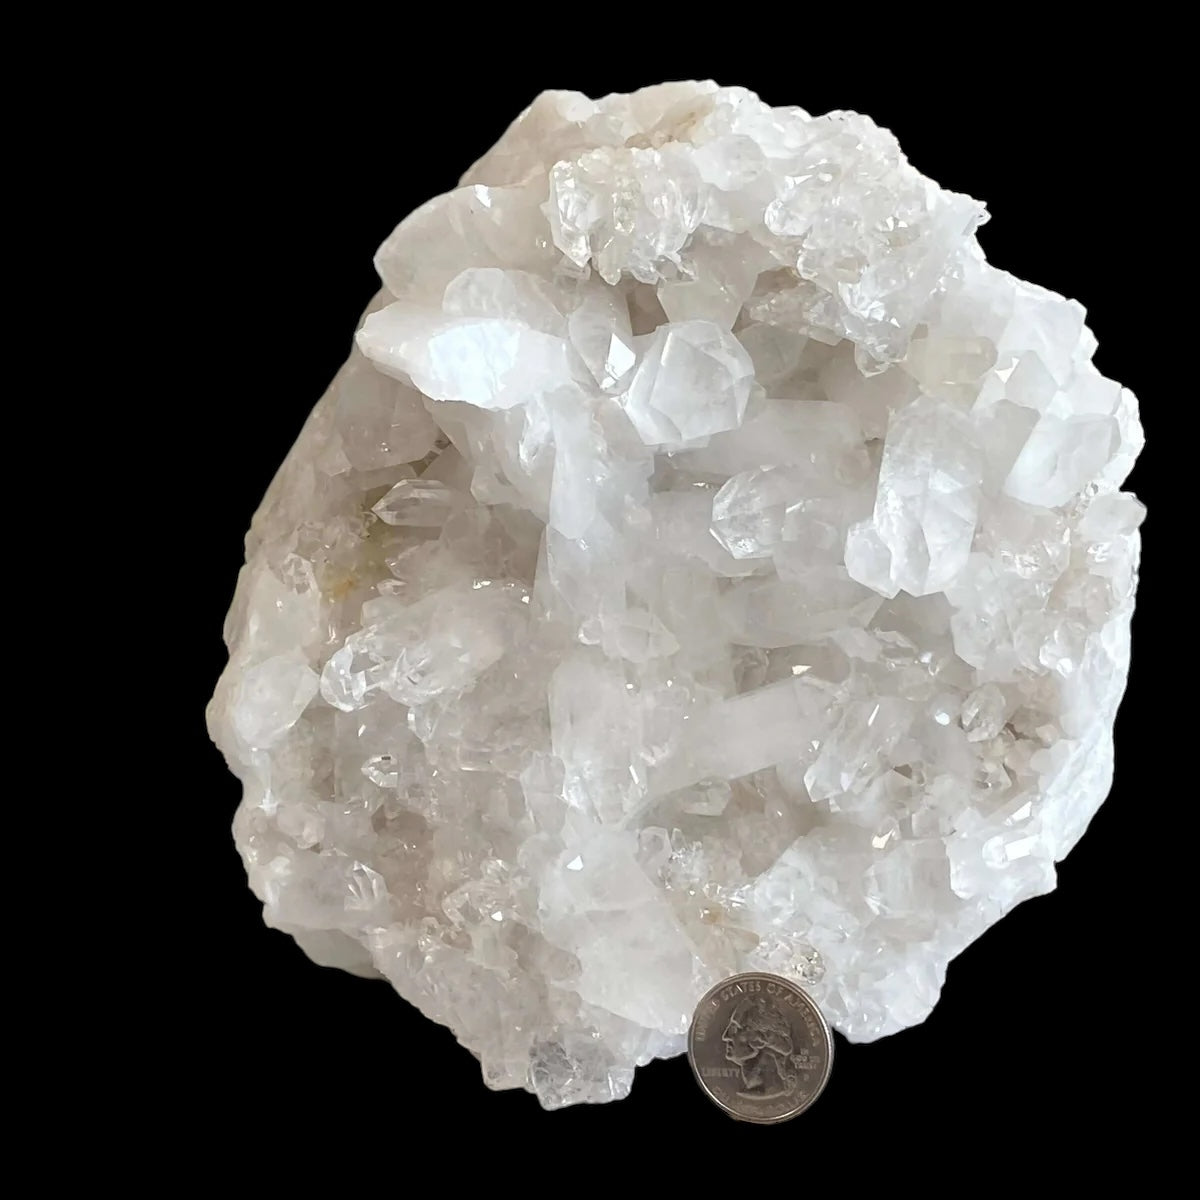 CLEARS THE MIND + AMPLIFIES INTENTIONS:: Brazilian Quartz Cluster Display